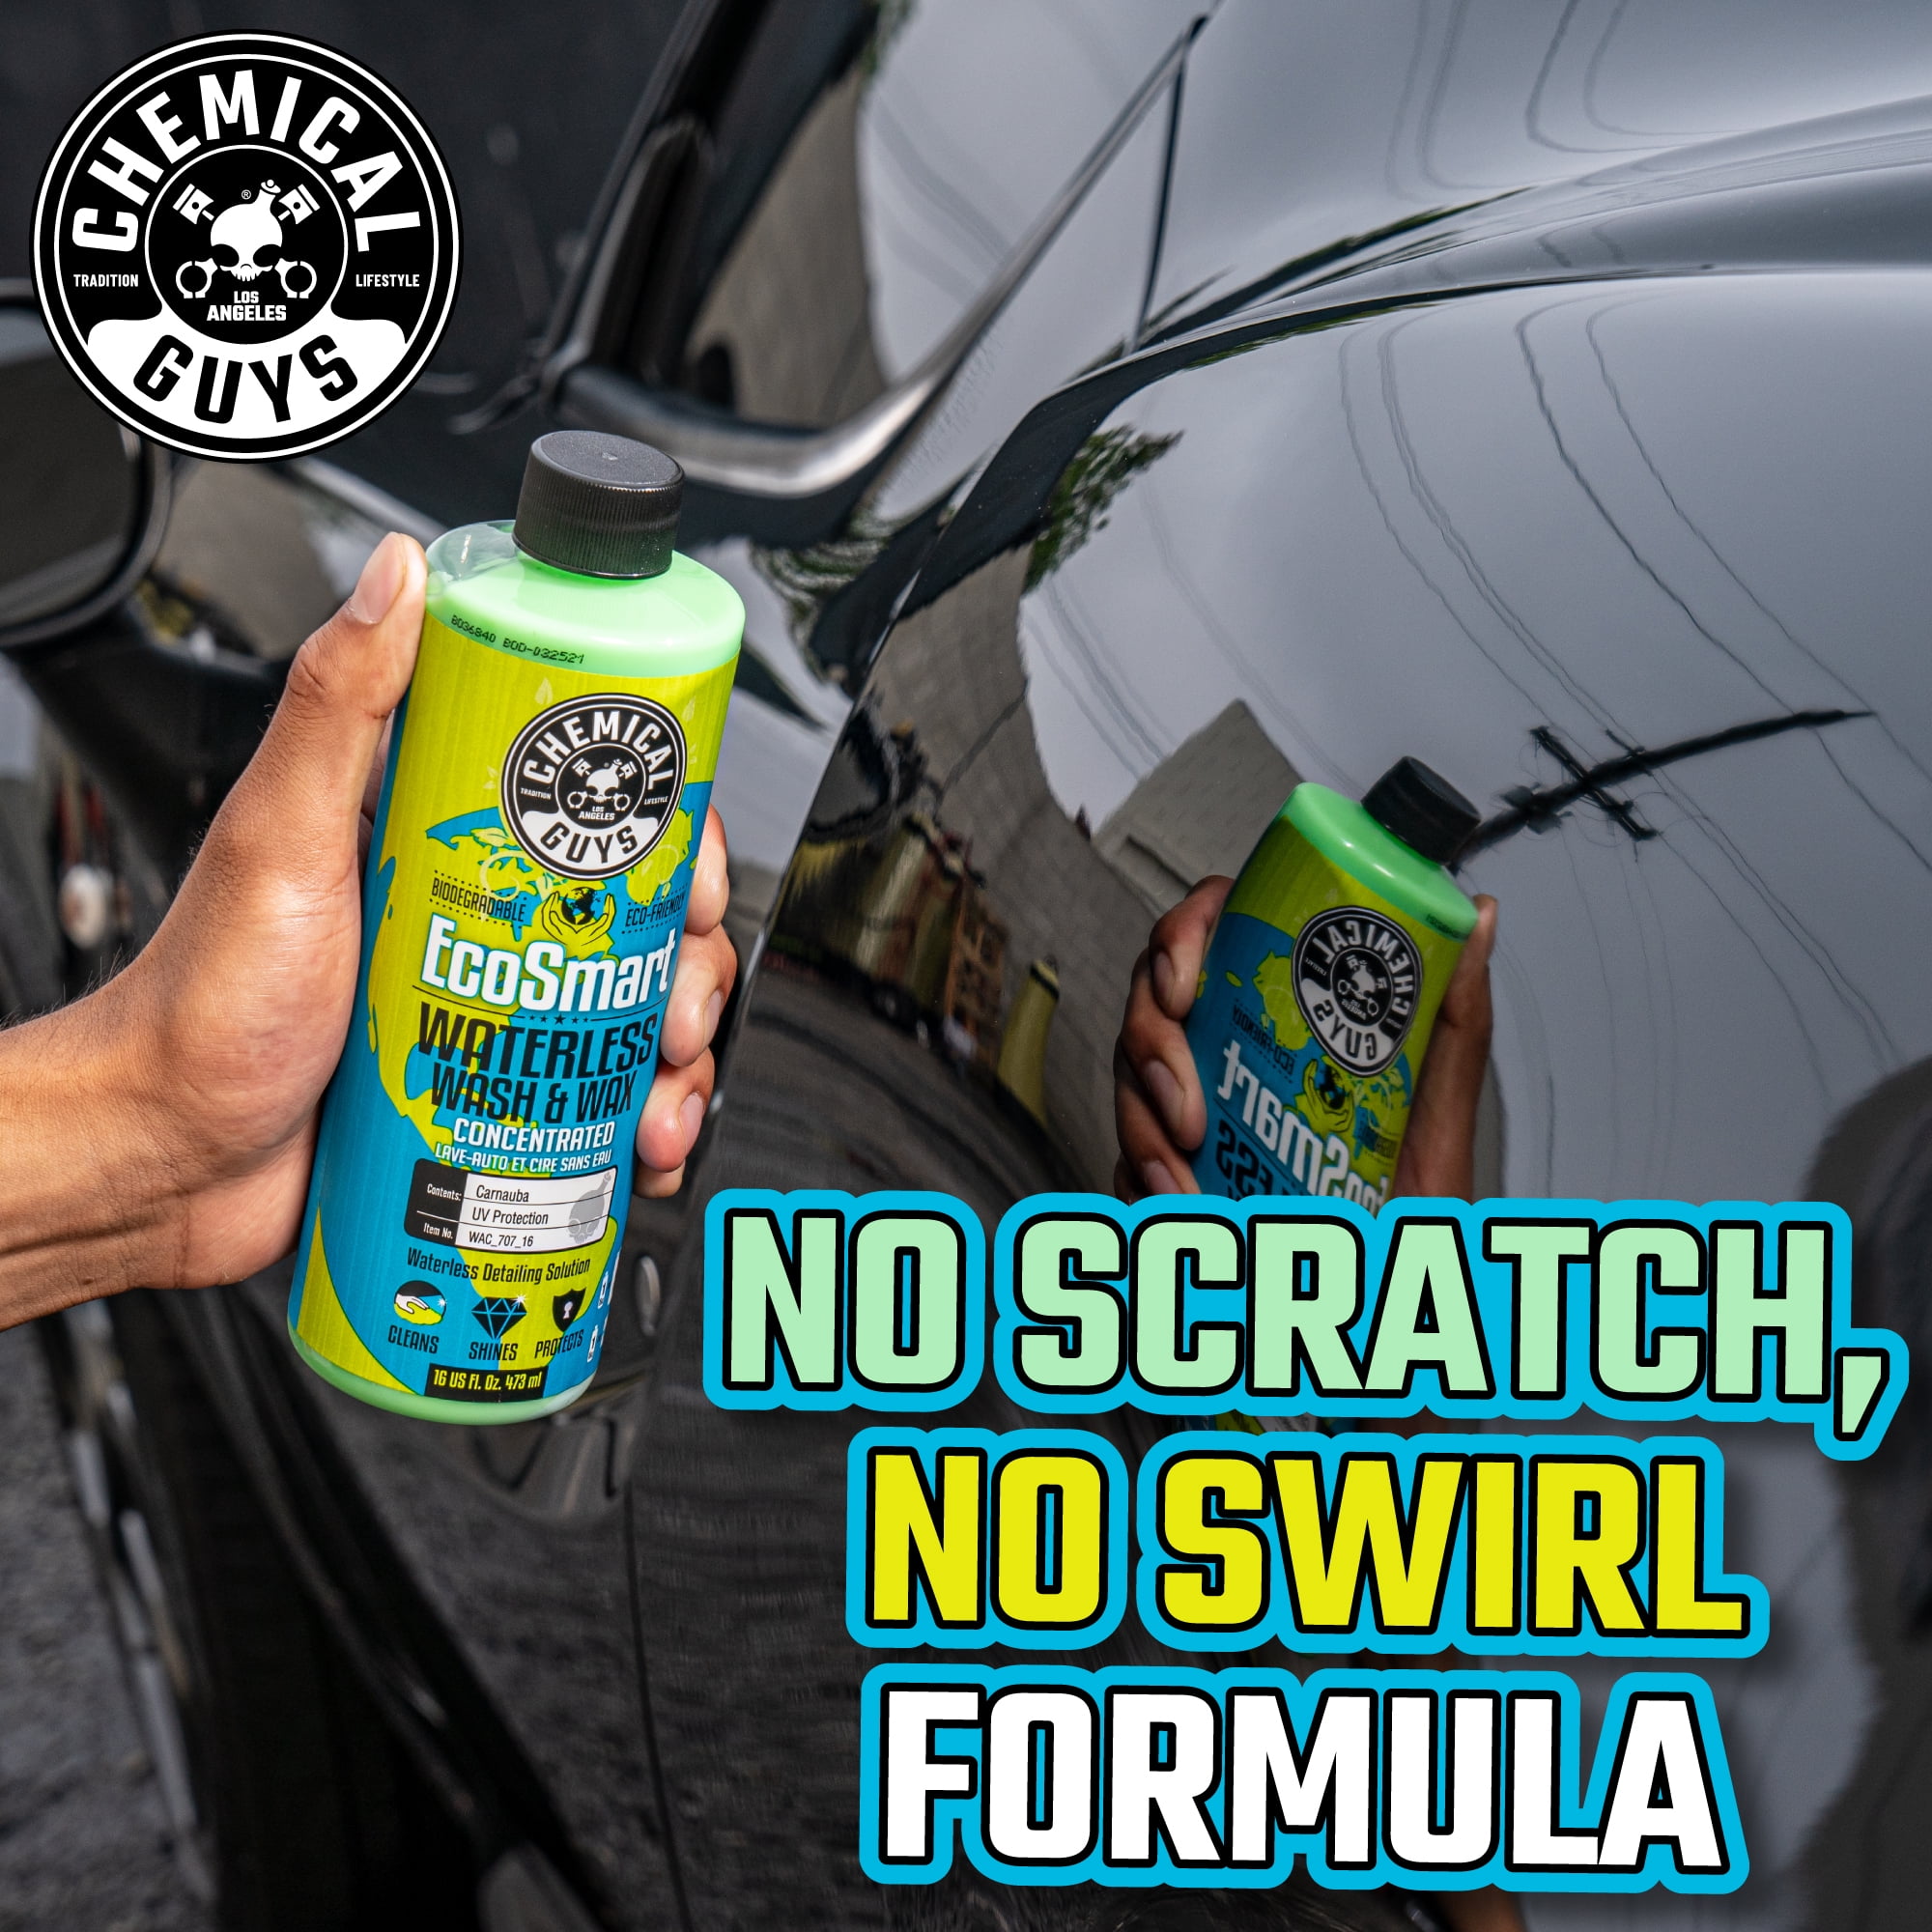 Chemical Guys WAC_707_16 EcoSmart Hyper Concentrated Waterless Car Wash and  Wax, Safe for Cars, Trucks, SUVs, Motorcycles, RVs & More, 16 fl oz